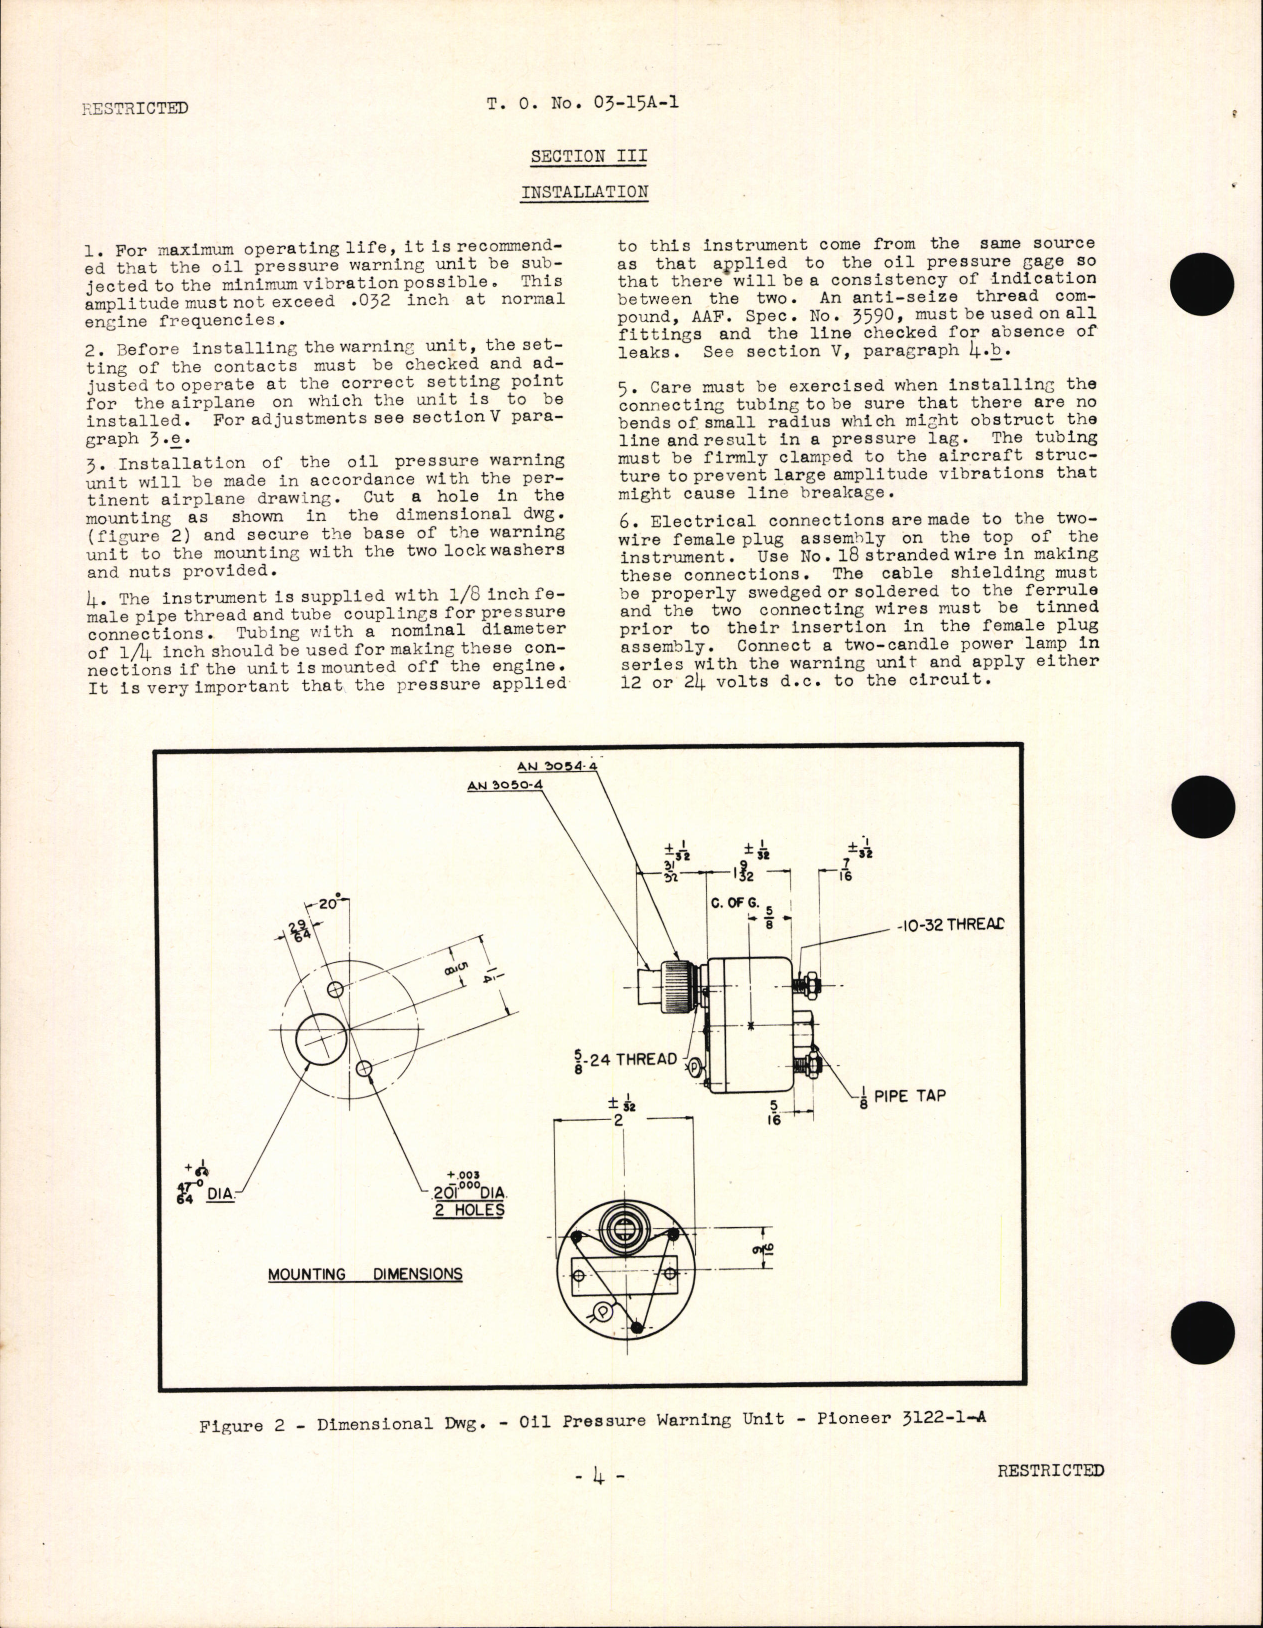 Sample page 6 from AirCorps Library document: Handbook of Instructions with Parts Catalog for Oil Pressure Warning Unit